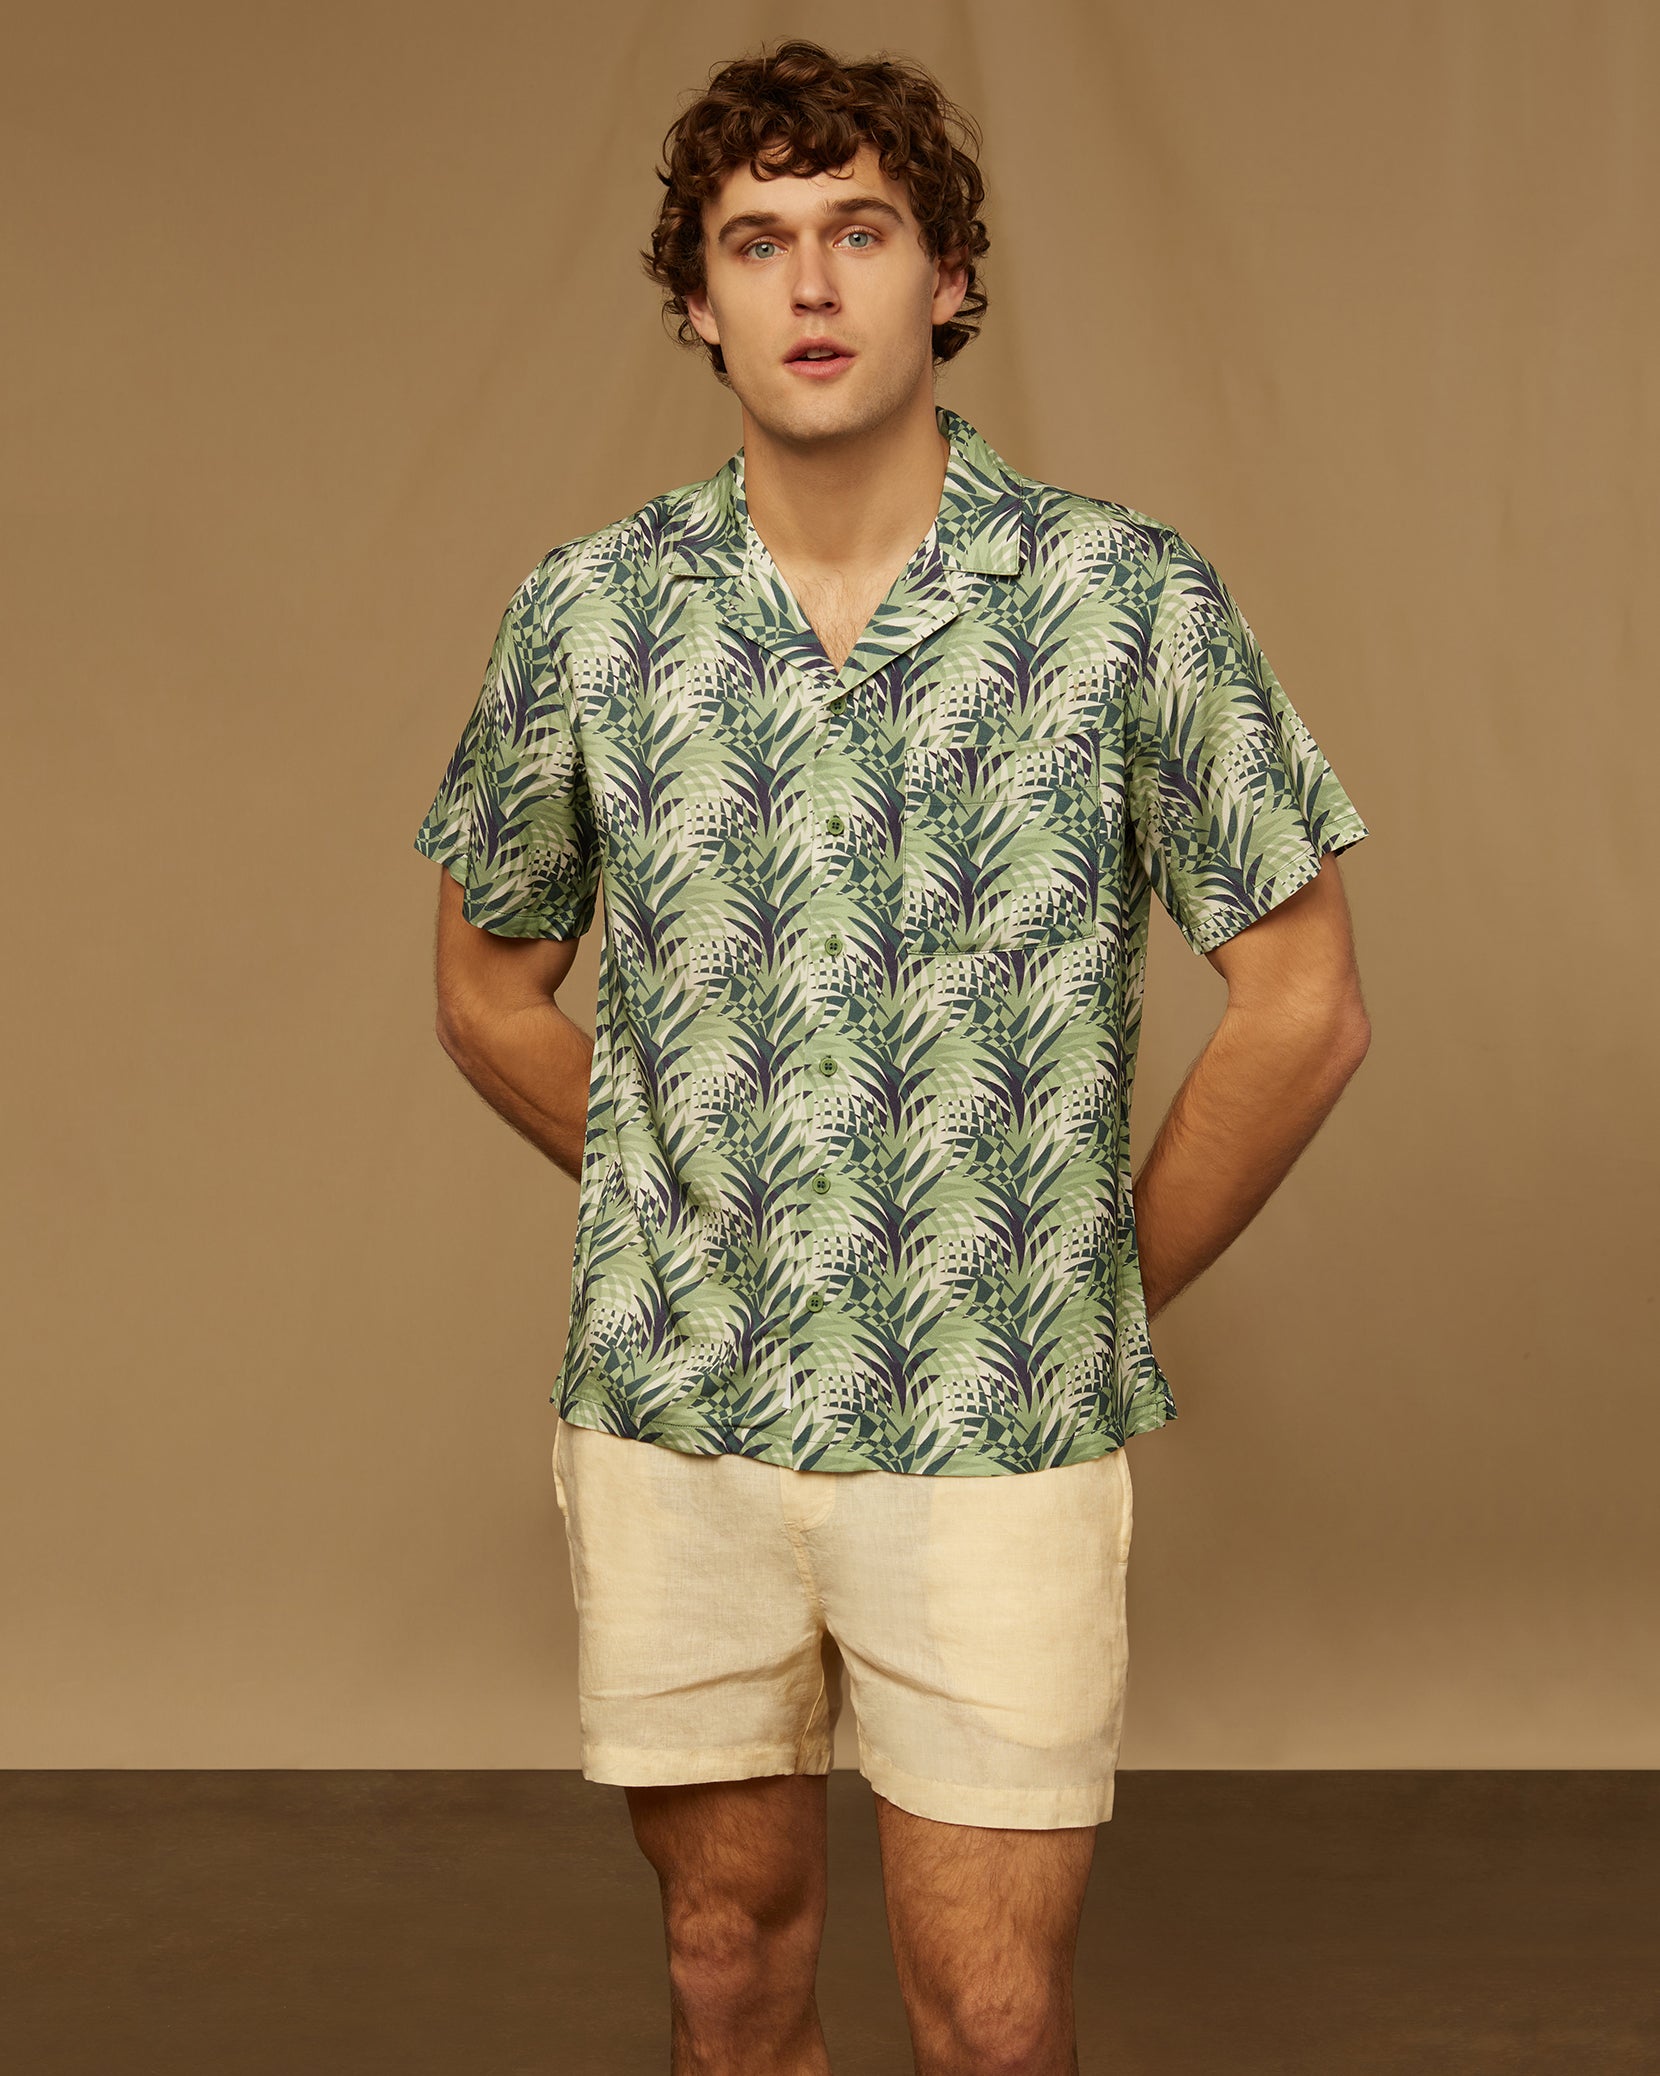 Onia's Green Oasis: Relaxed Spring Outfits – The Fashionisto